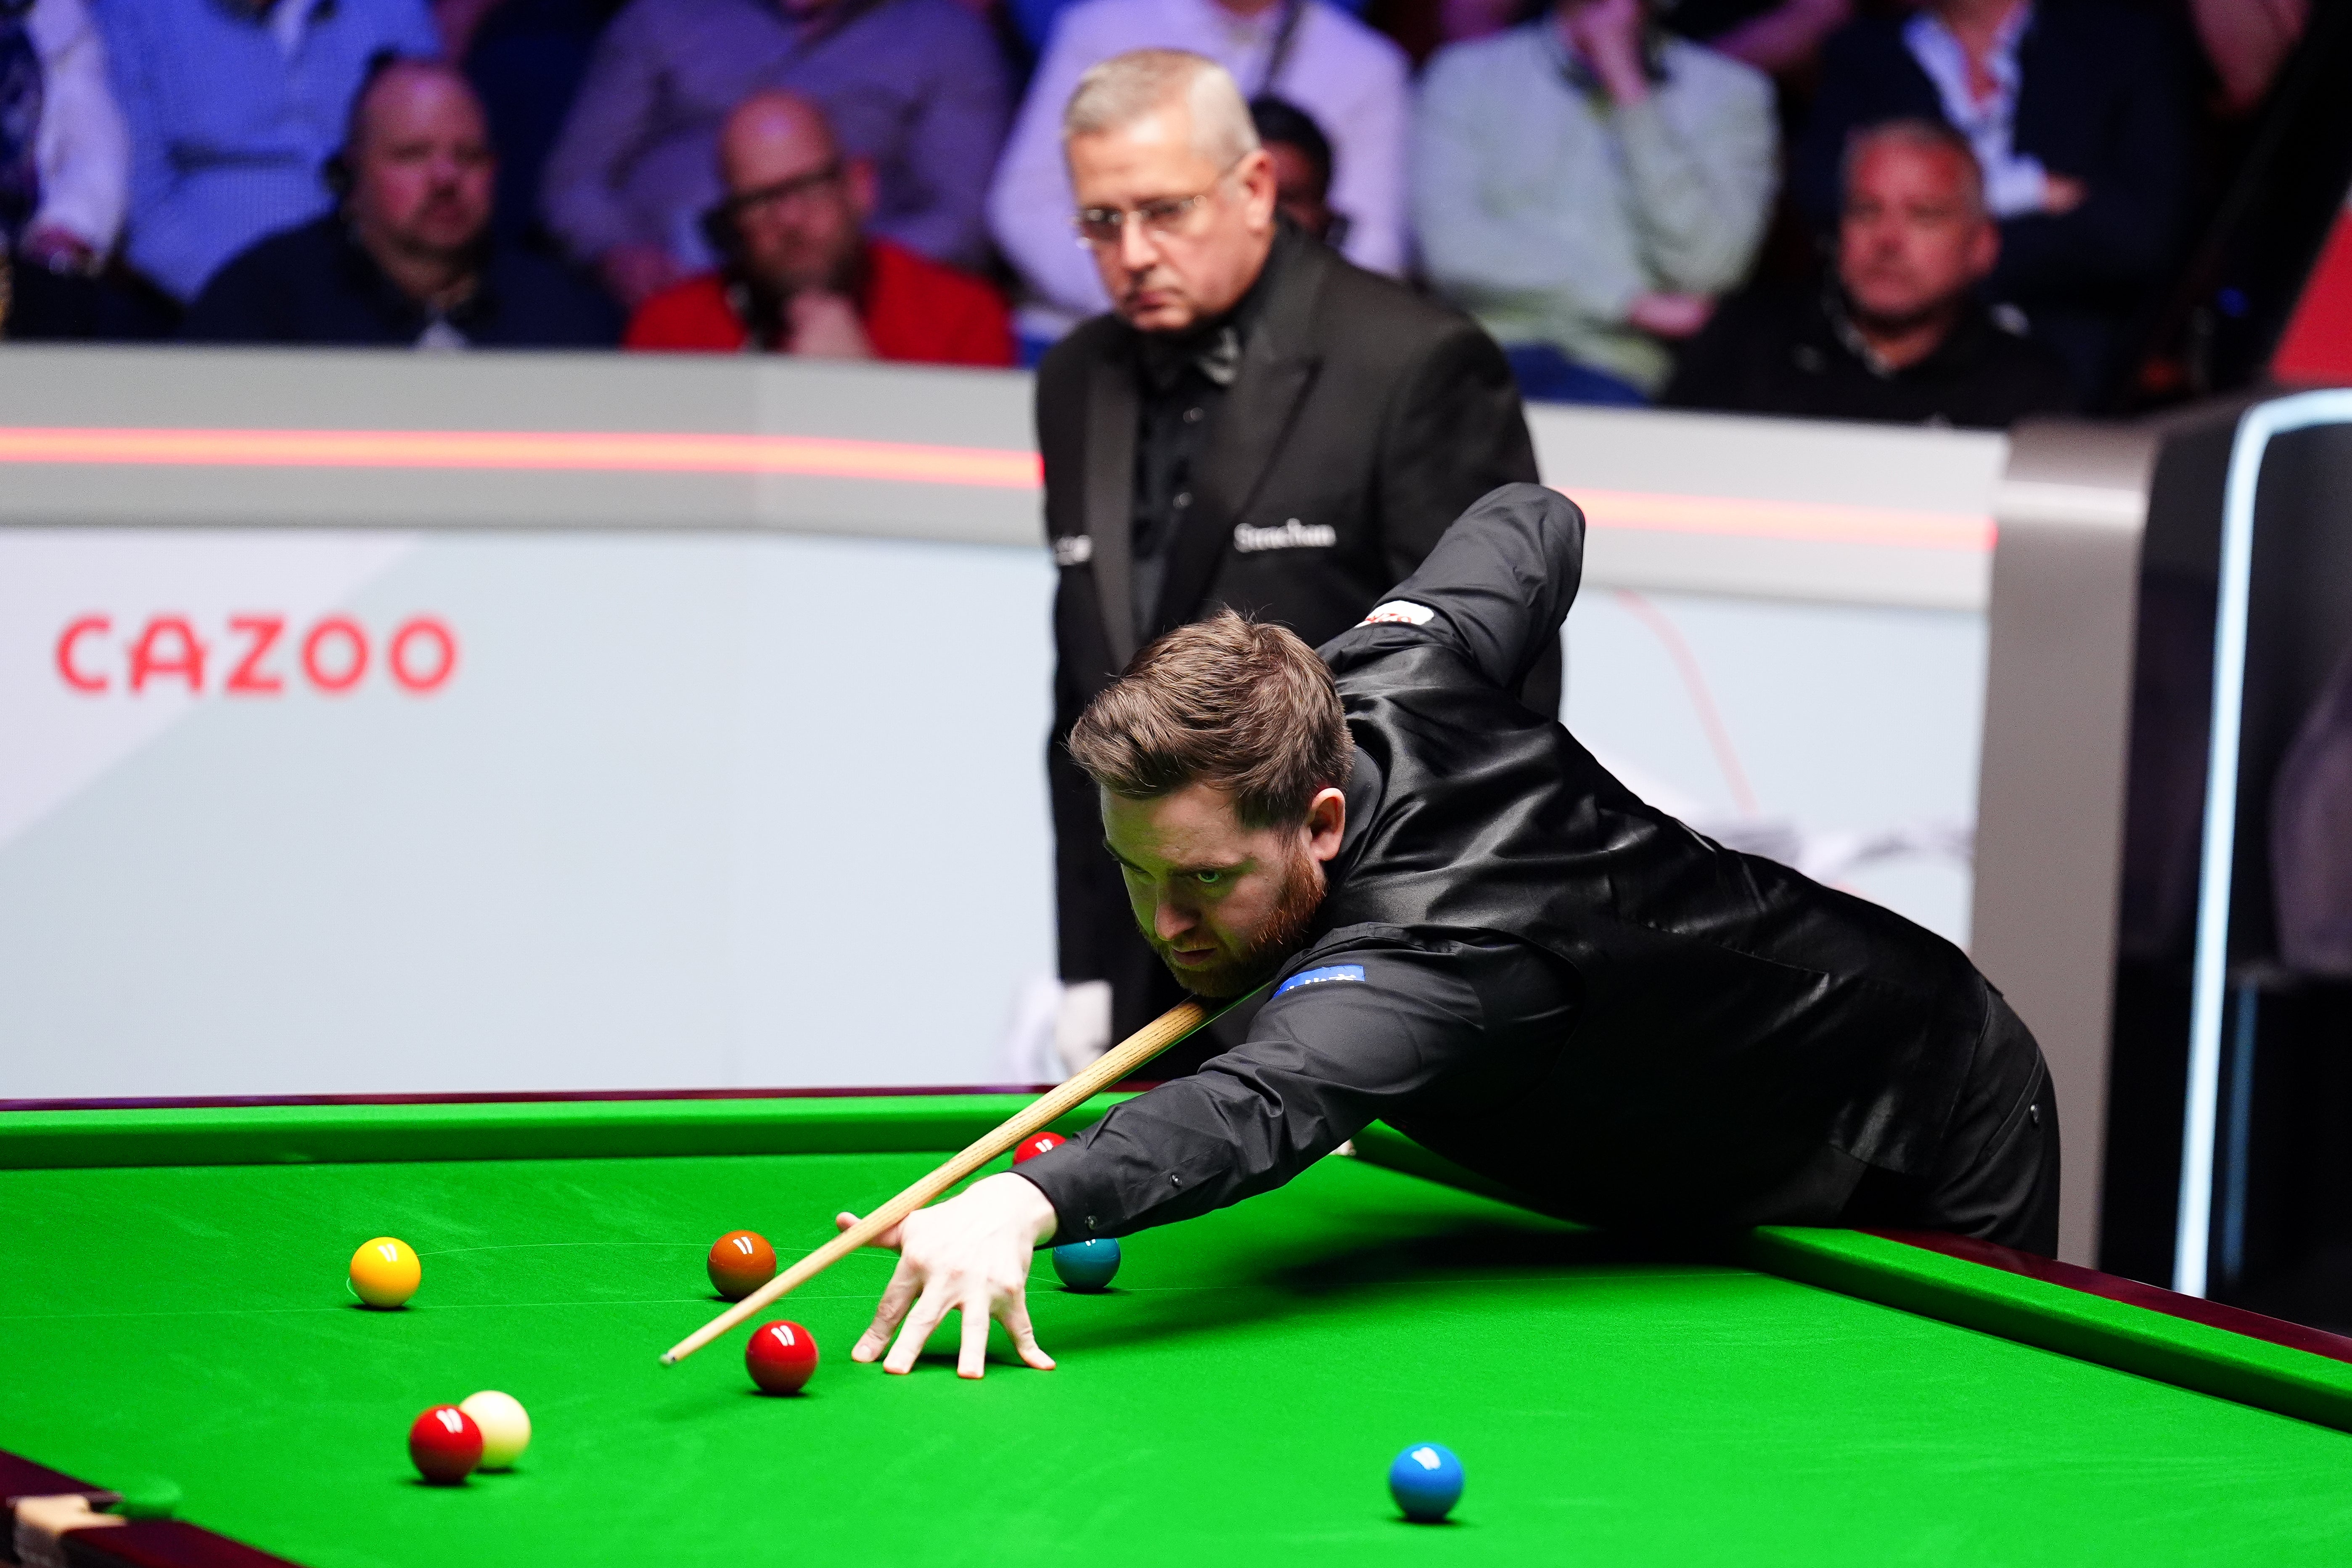 Jones bridges over a red to the cue ball during the final